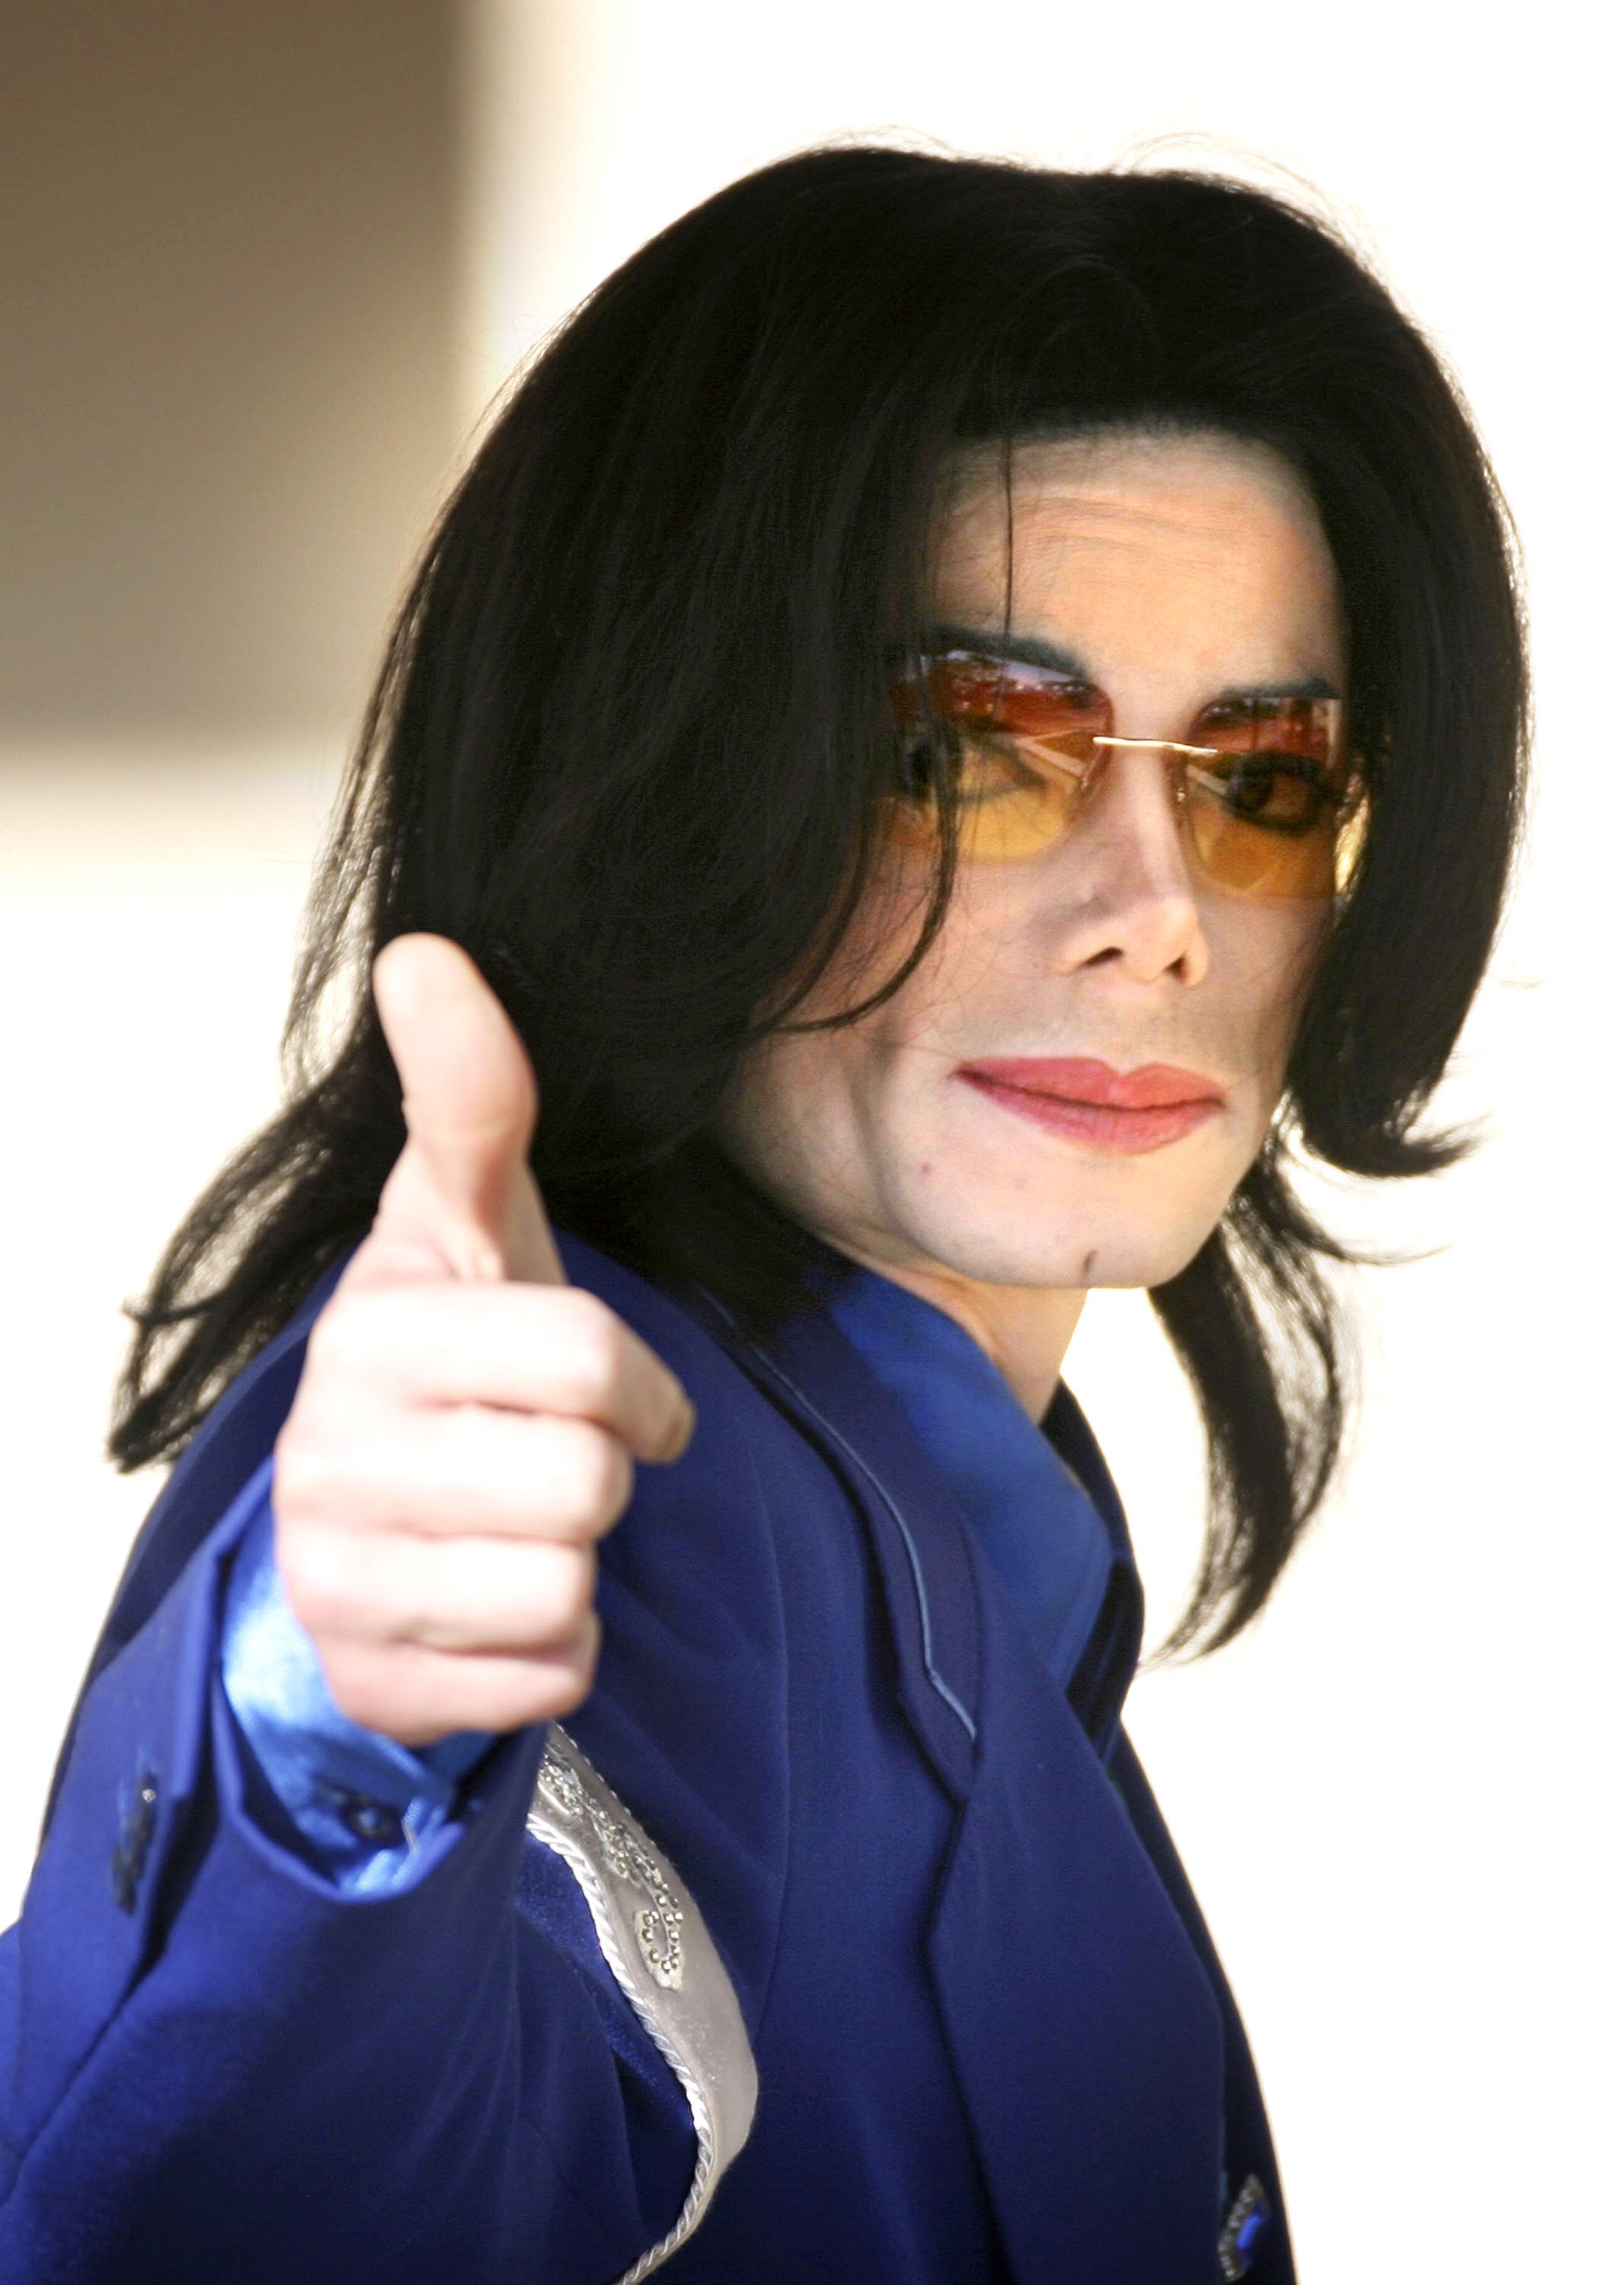 Michael Jackson at the Santa Barbara County Courthouse for his child molestation trial on March 16, 2005 in California. | Photo: Getty Images